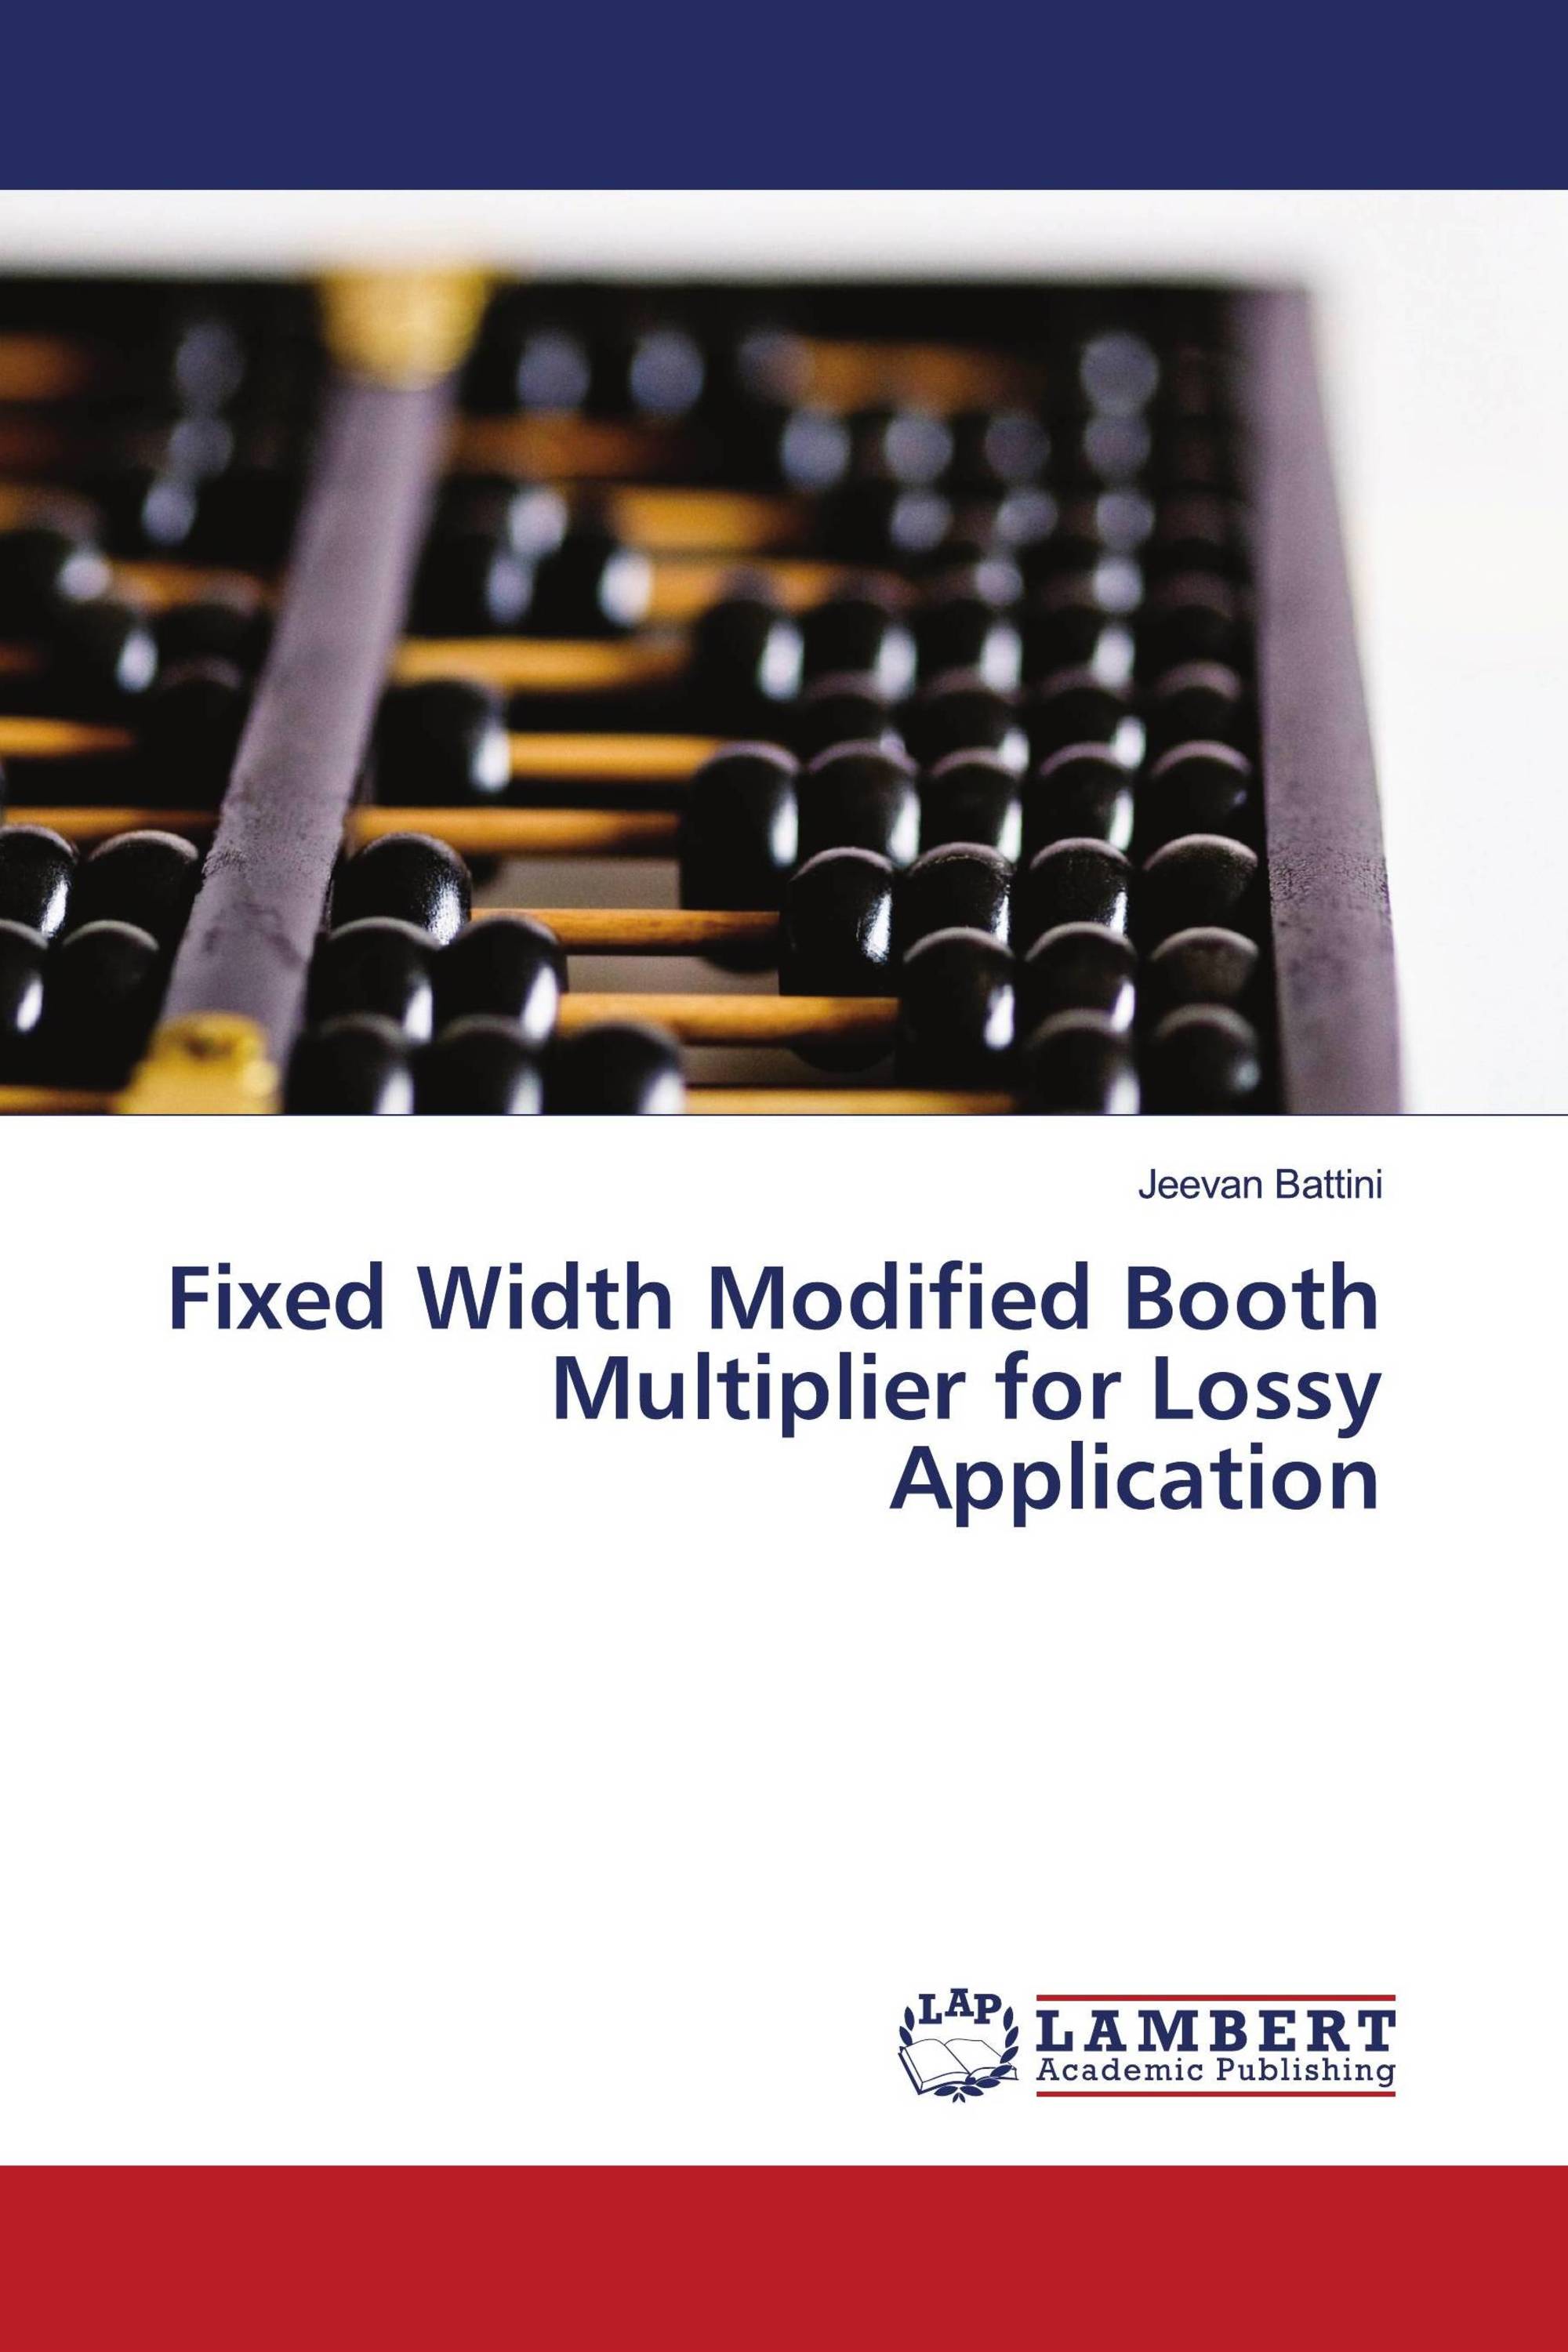 Fixed Width Modified Booth Multiplier for Lossy Application